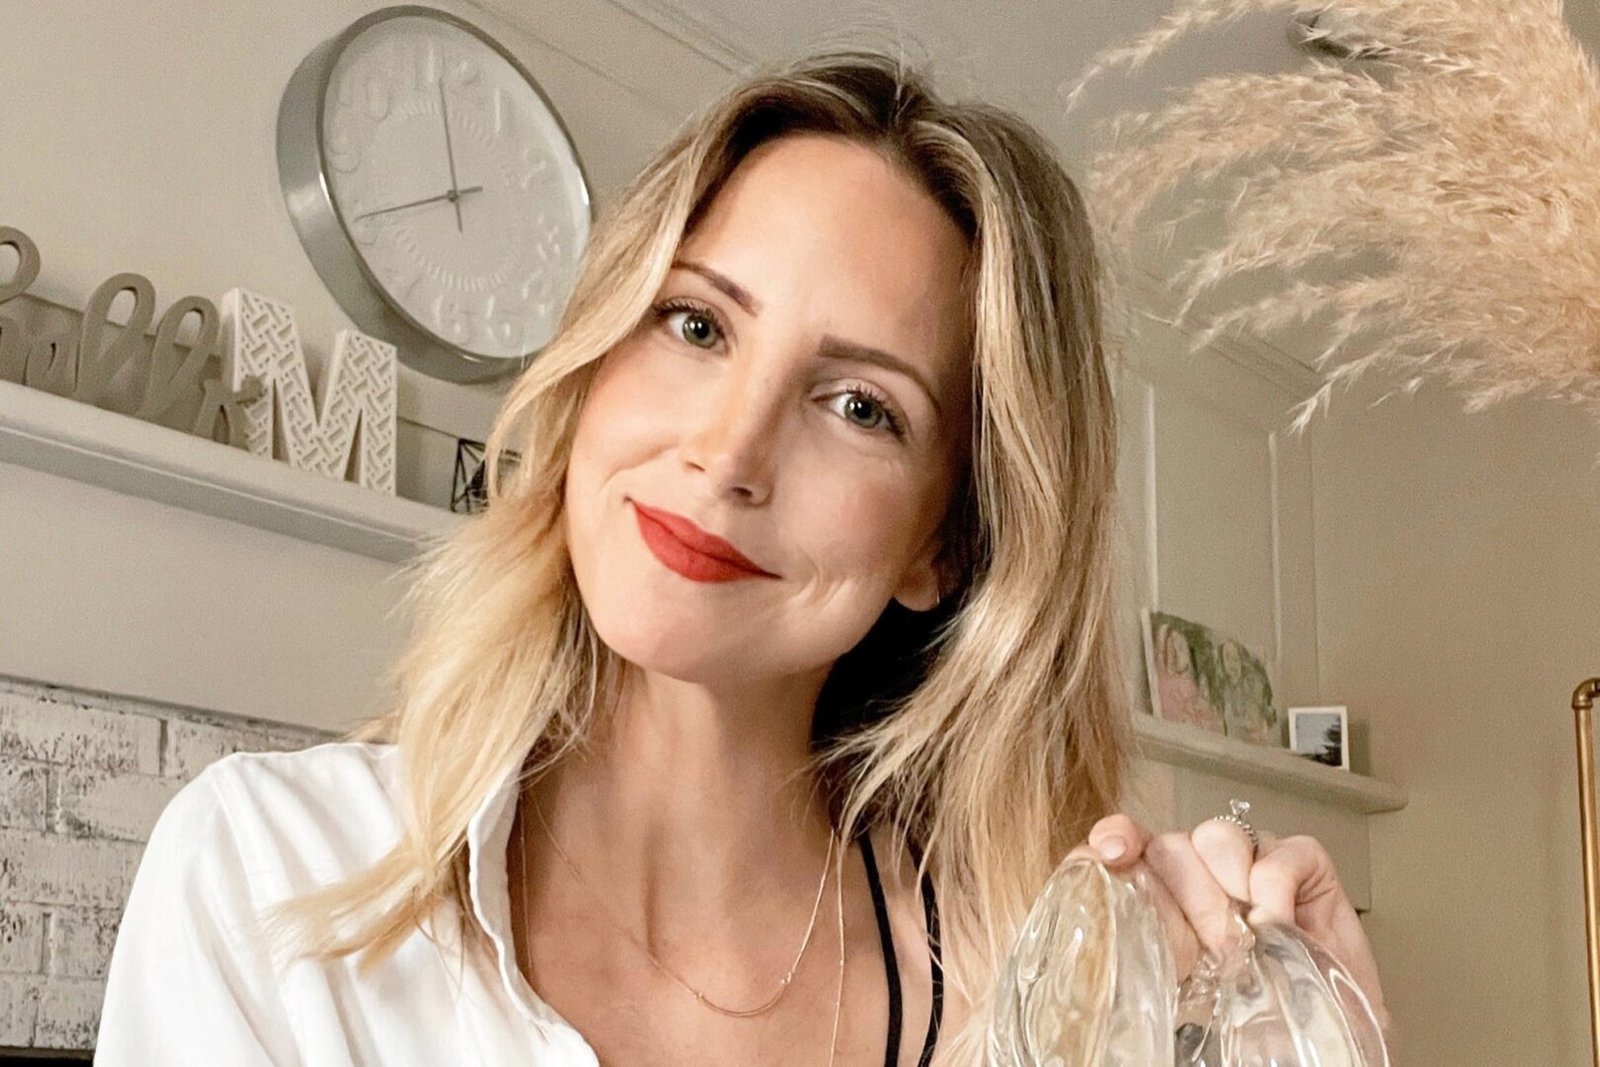 Breast Implants Left This Founder With Debilitating Symptoms, So She Launched an Intimate-Apparel Line That Goes Beyond Buzzwords